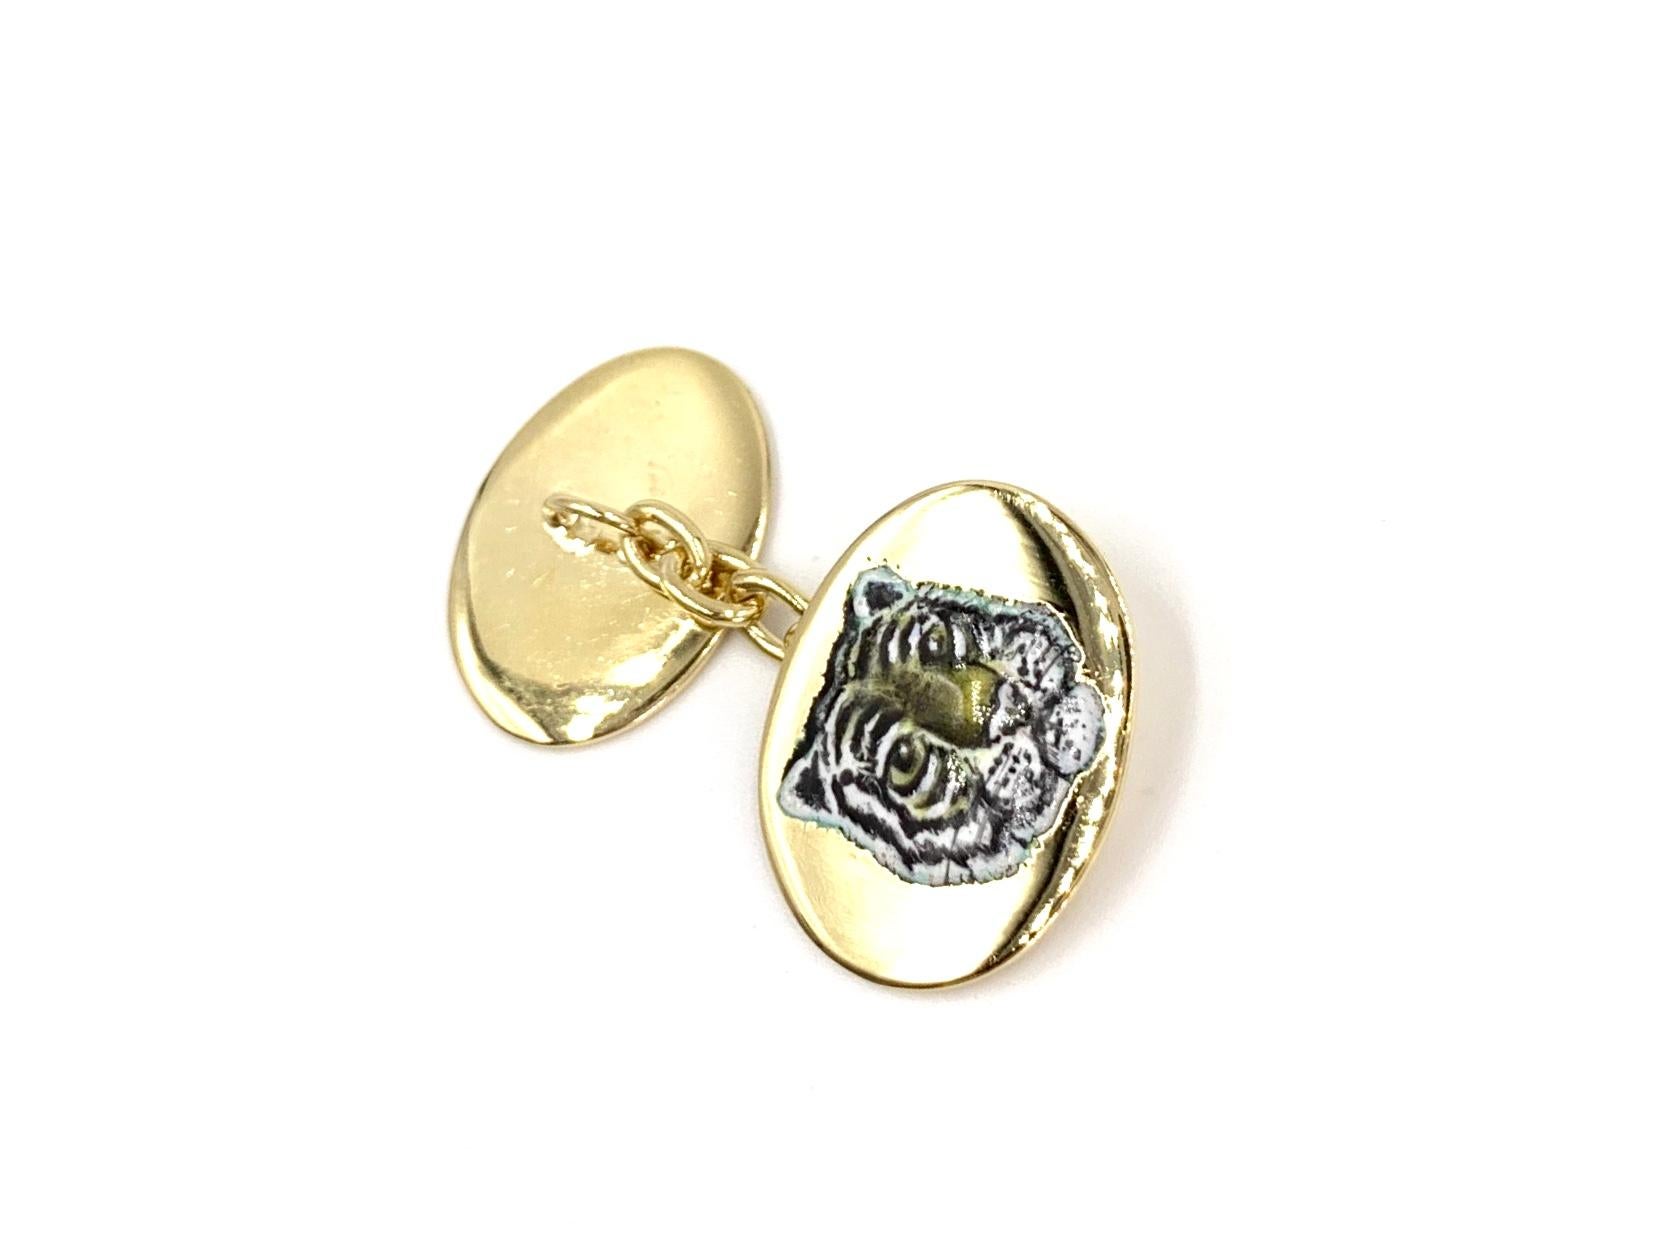 18 Karat Gold and Enamel Tiger Cufflinks In Good Condition For Sale In Pikesville, MD